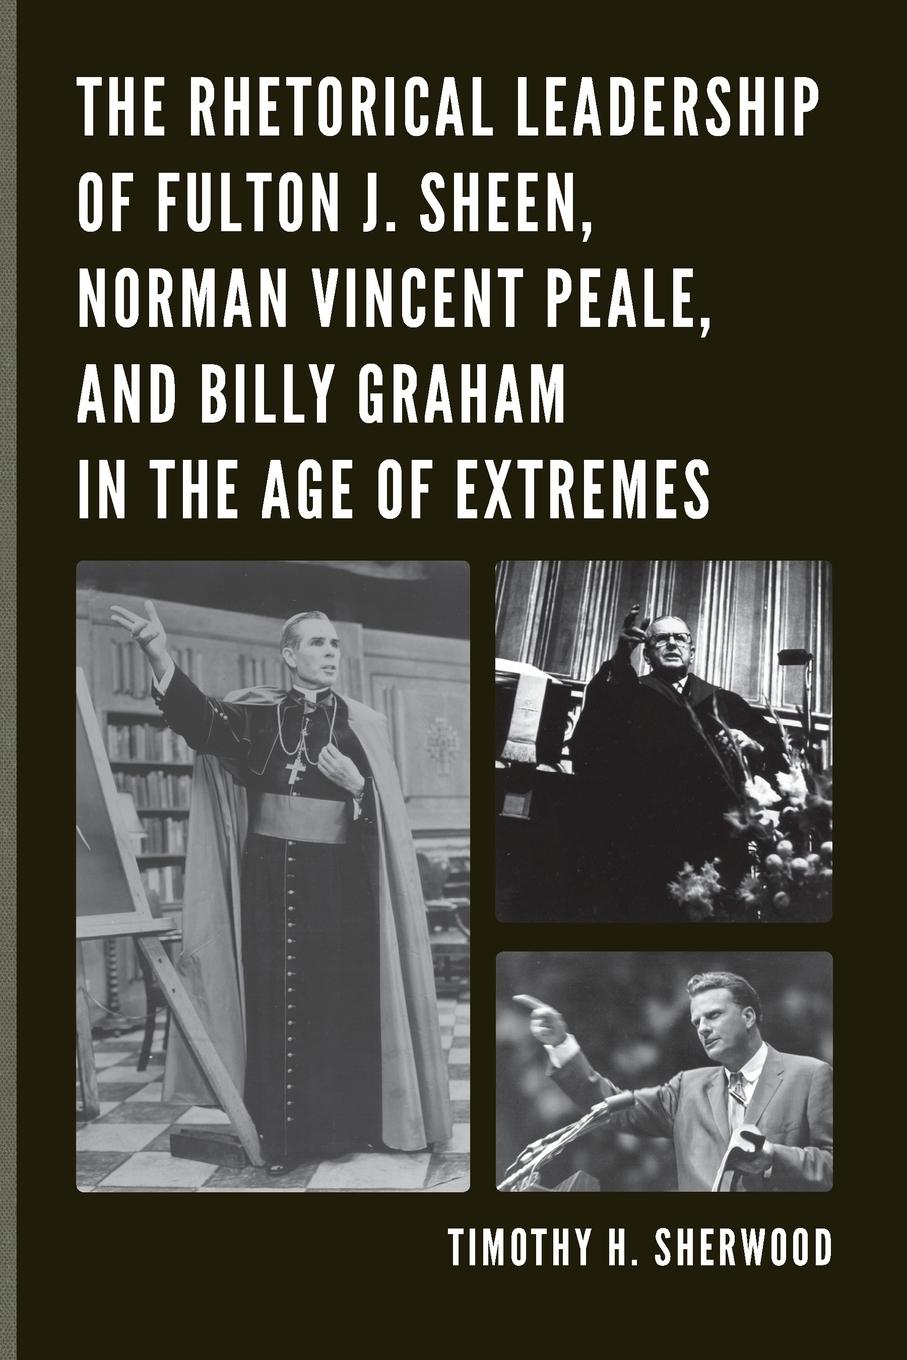 The Rhetorical Leadership of Fulton J. Sheen, Norman Vincent Peale, and Billy Graham in the Age of Extremes - Sherwood, Timothy H.